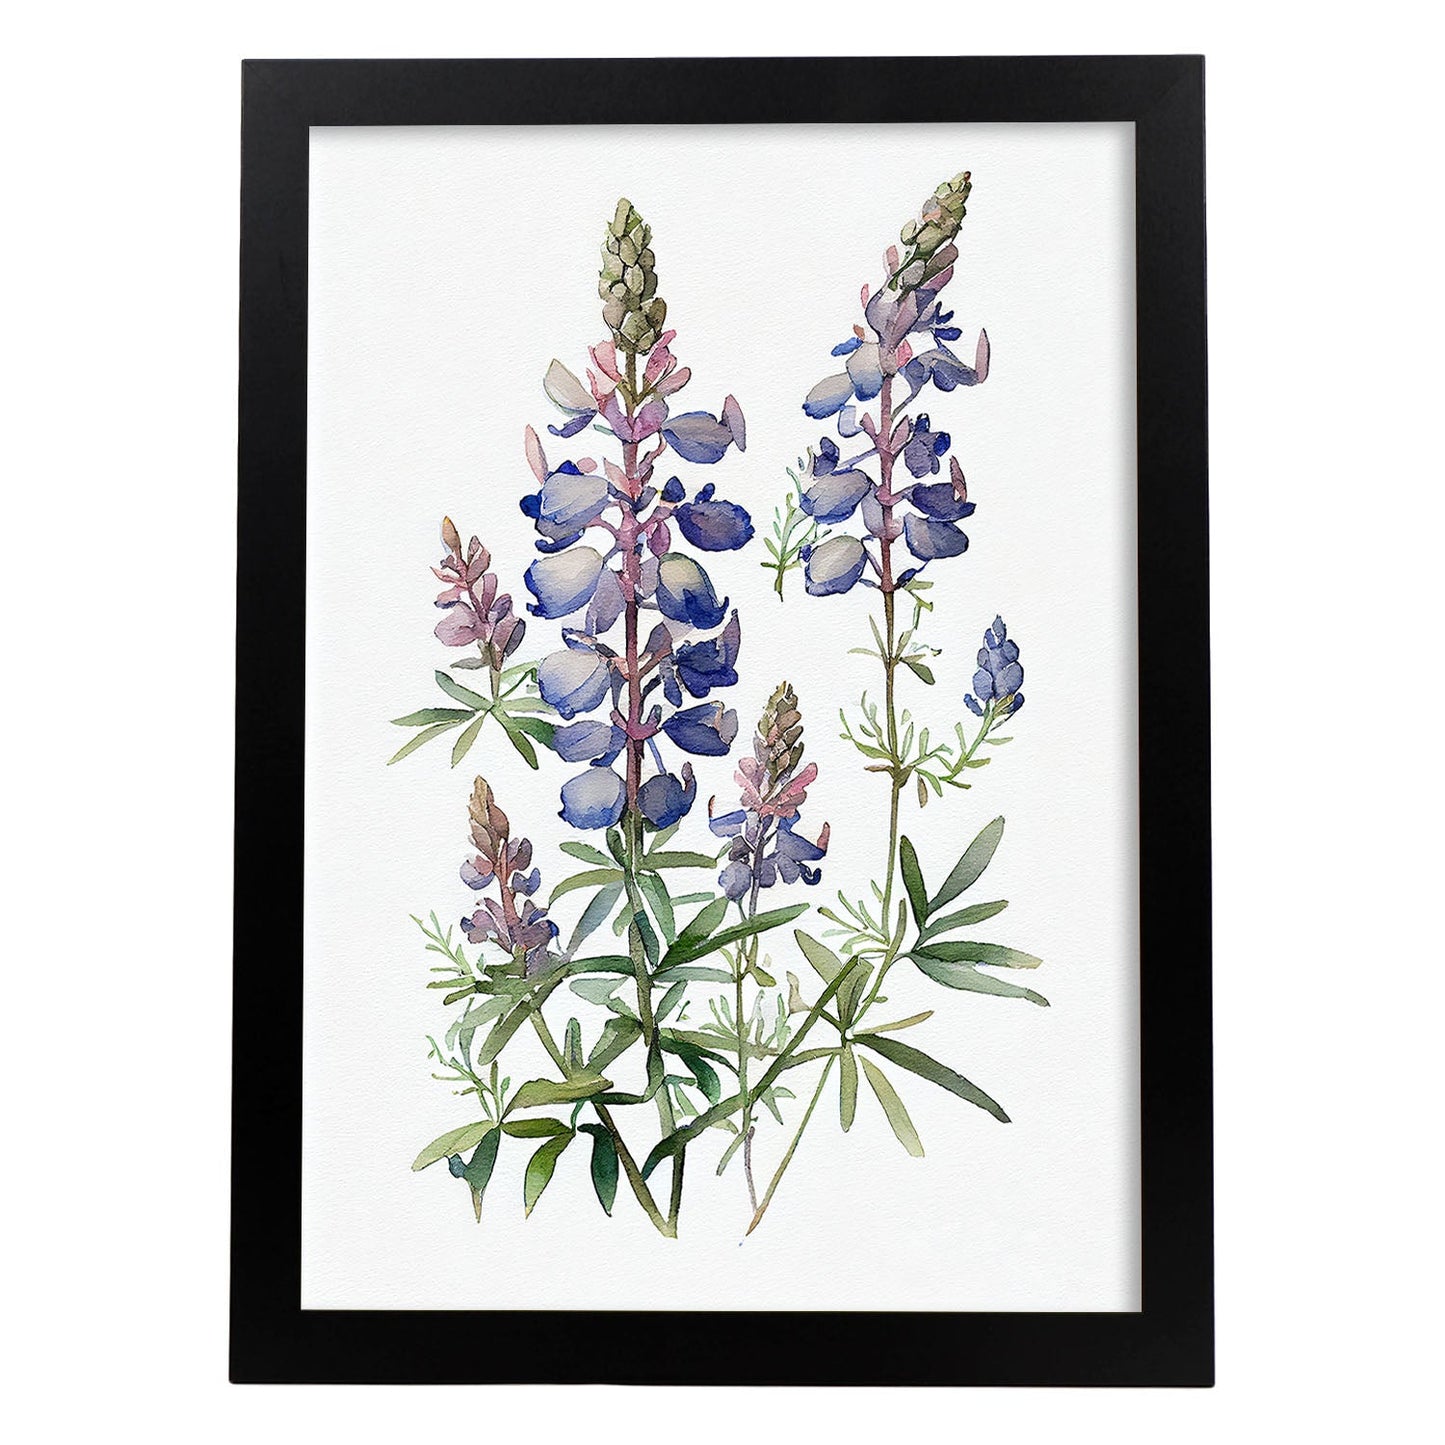 Nacnic watercolor minmal Bluebonnet_2. Aesthetic Wall Art Prints for Bedroom or Living Room Design.